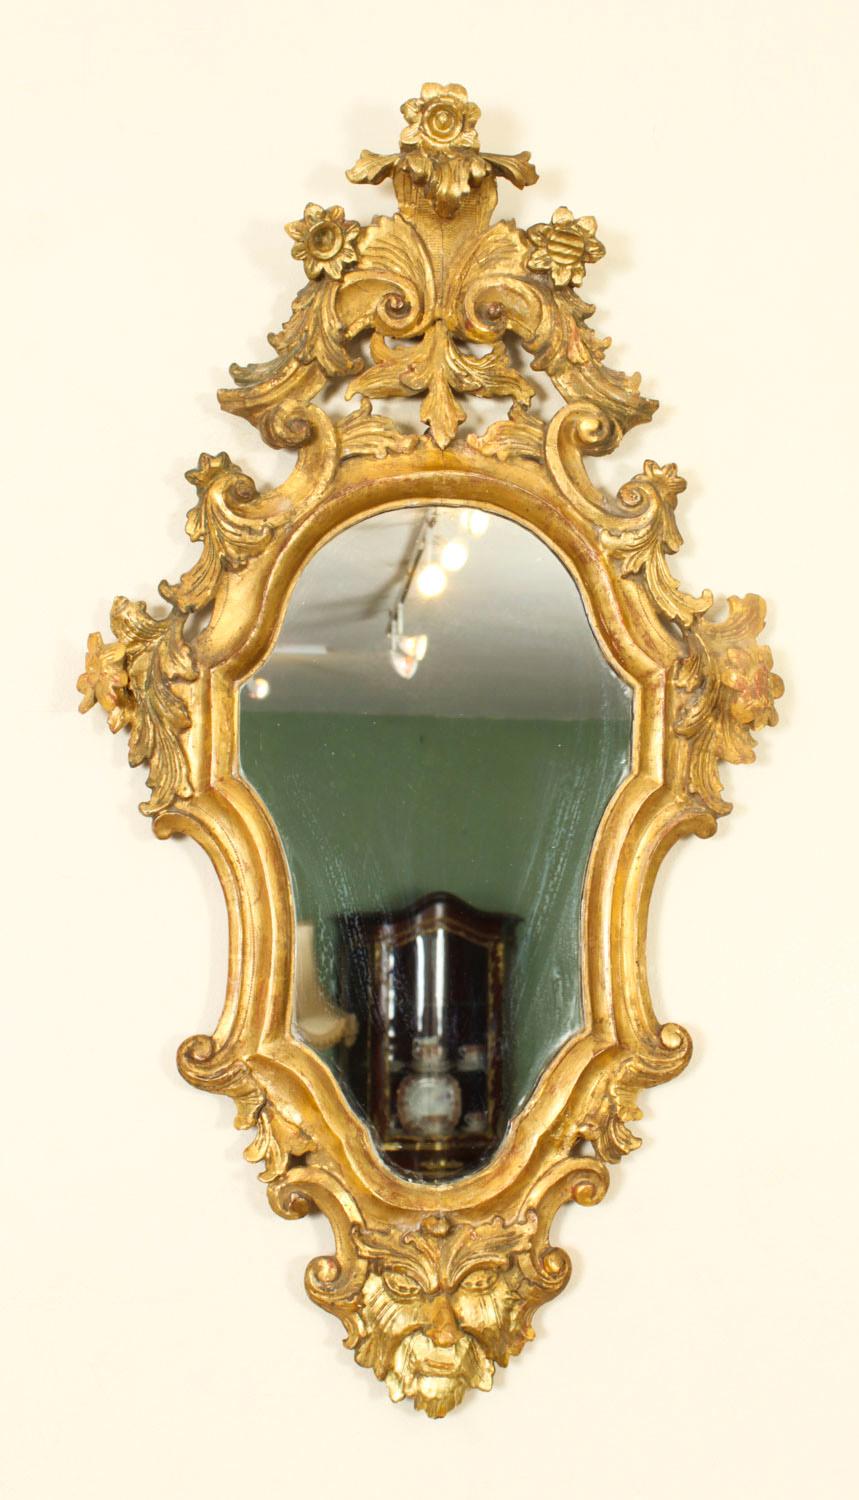 Antique Pair Florentine Rococo Giltwood Mirrors 19th Century 77x42cm In Good Condition For Sale In London, GB